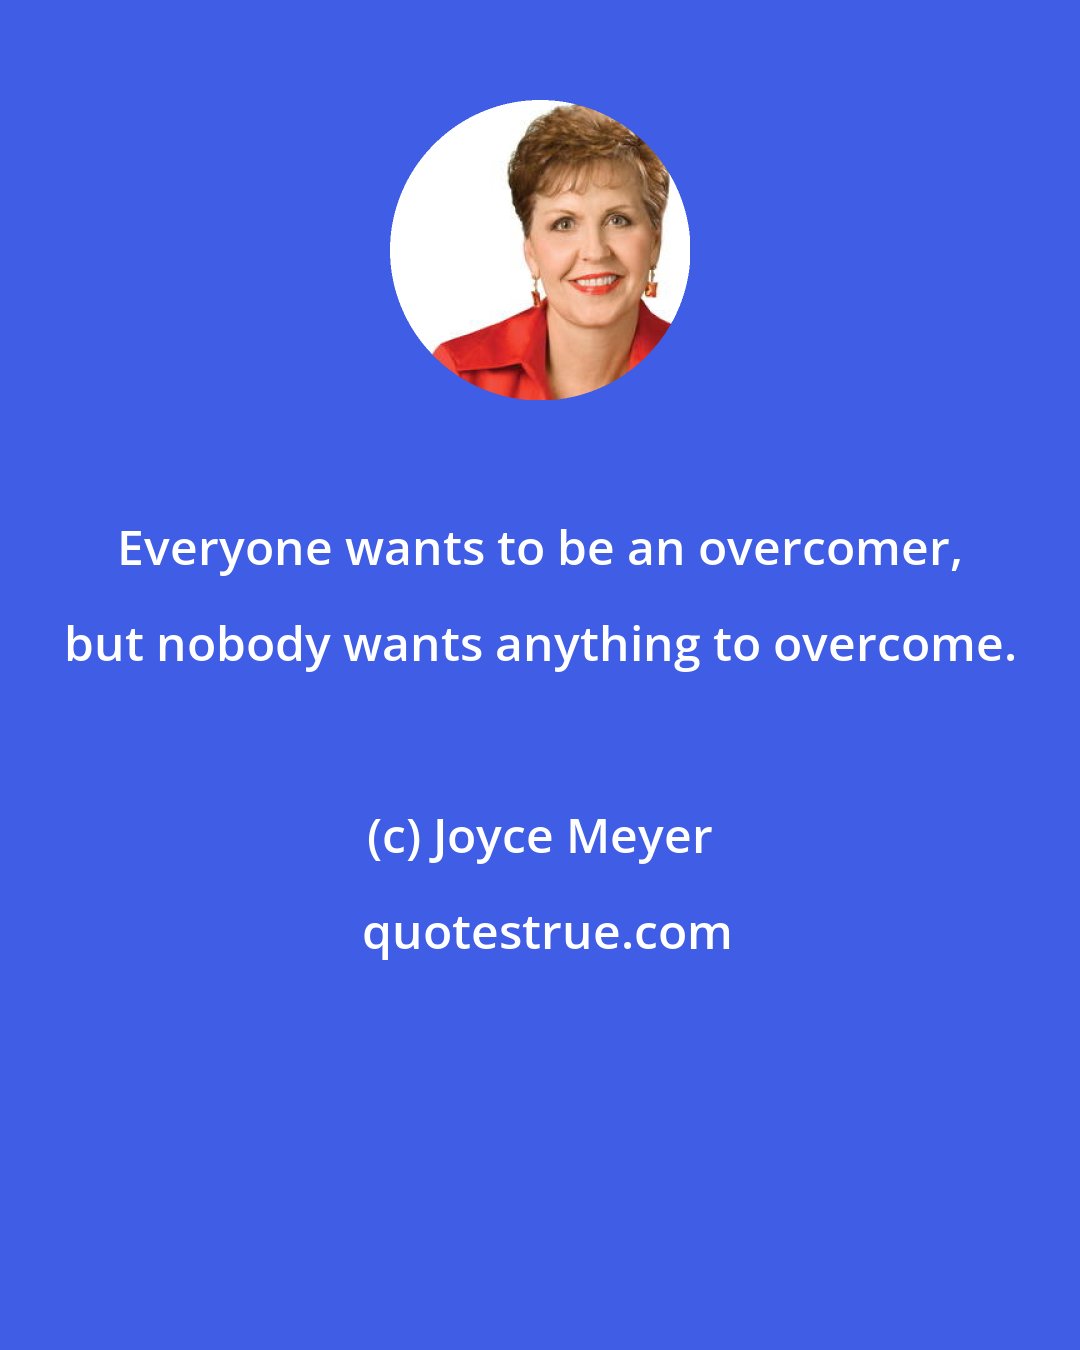 Joyce Meyer: Everyone wants to be an overcomer, but nobody wants anything to overcome.